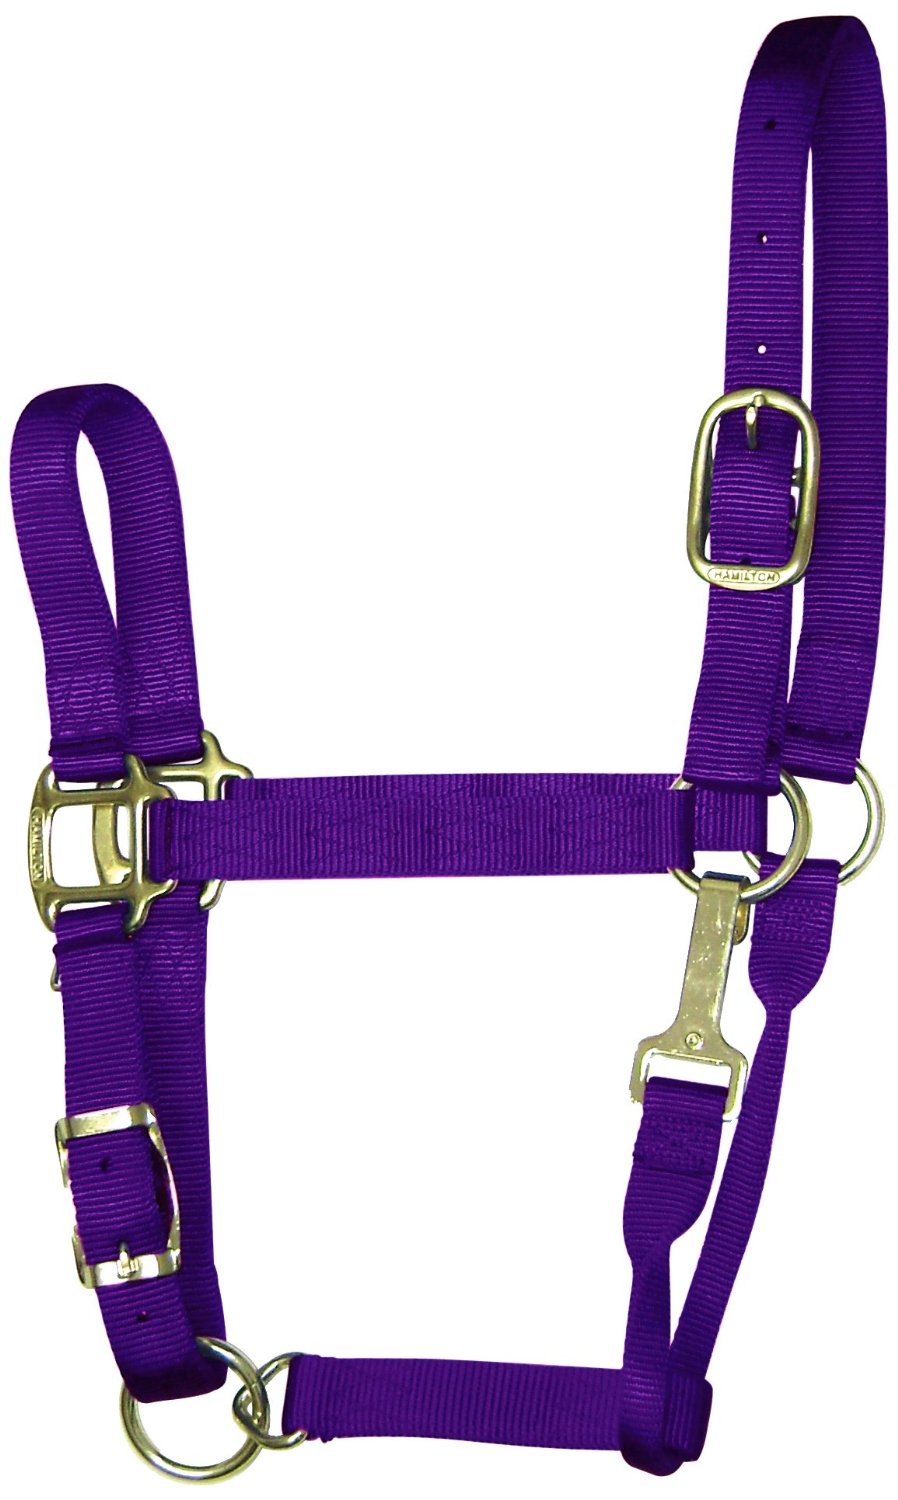 buy horse tack at cheap rate in bulk. wholesale & retail farm essentials & goods store.